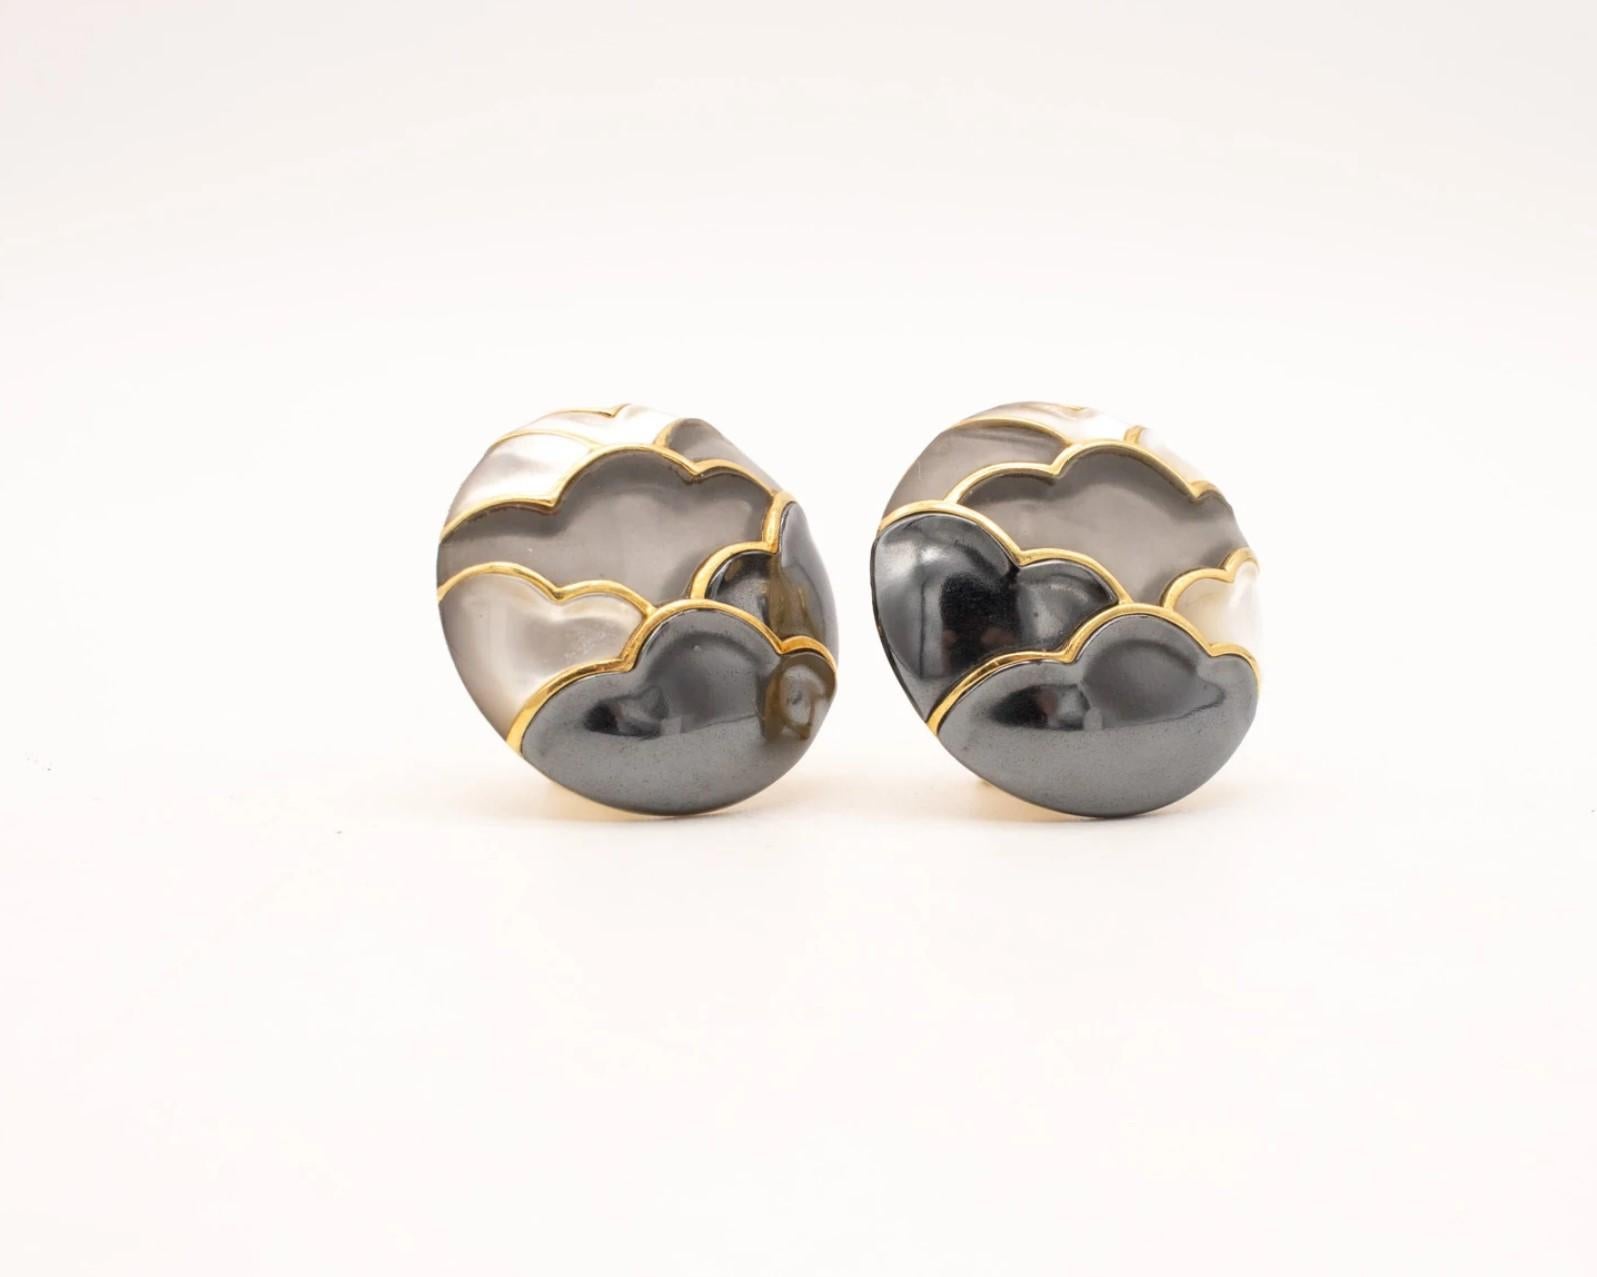 Unusual pair of ear-clips designed by Angela Cummings.

A rare one-of-a-kind vintage pair of clips-earrings designed as a Japonisme landscape abstraction of clouds and mountains. This gorgeous pair has been created by Angela Cummings back in the